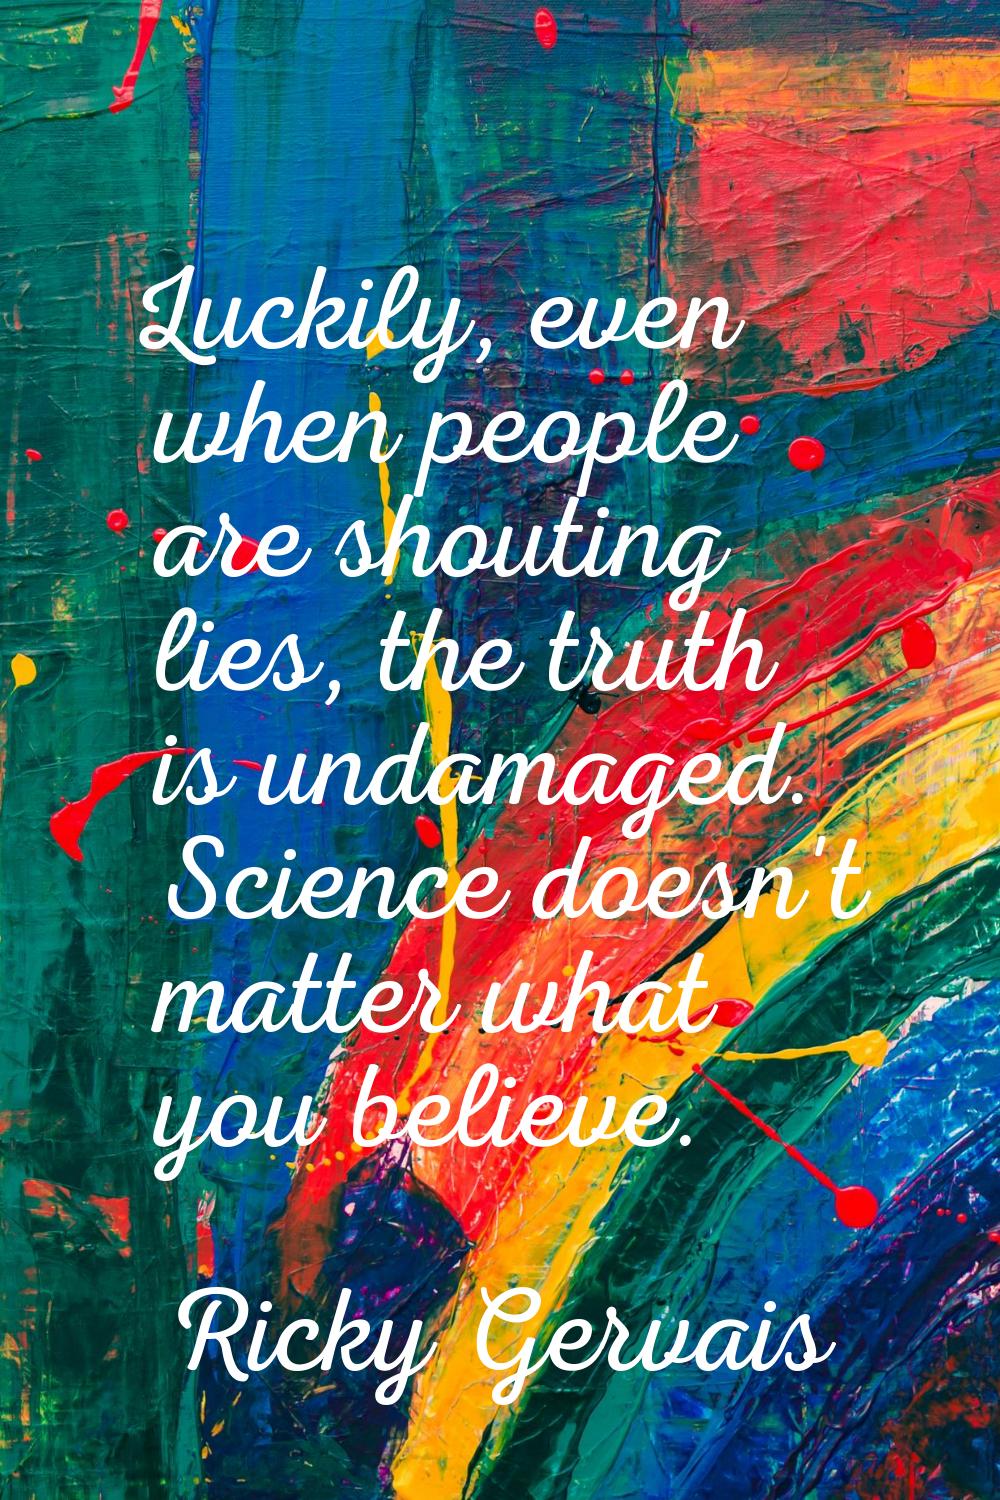 Luckily, even when people are shouting lies, the truth is undamaged. Science doesn't matter what yo